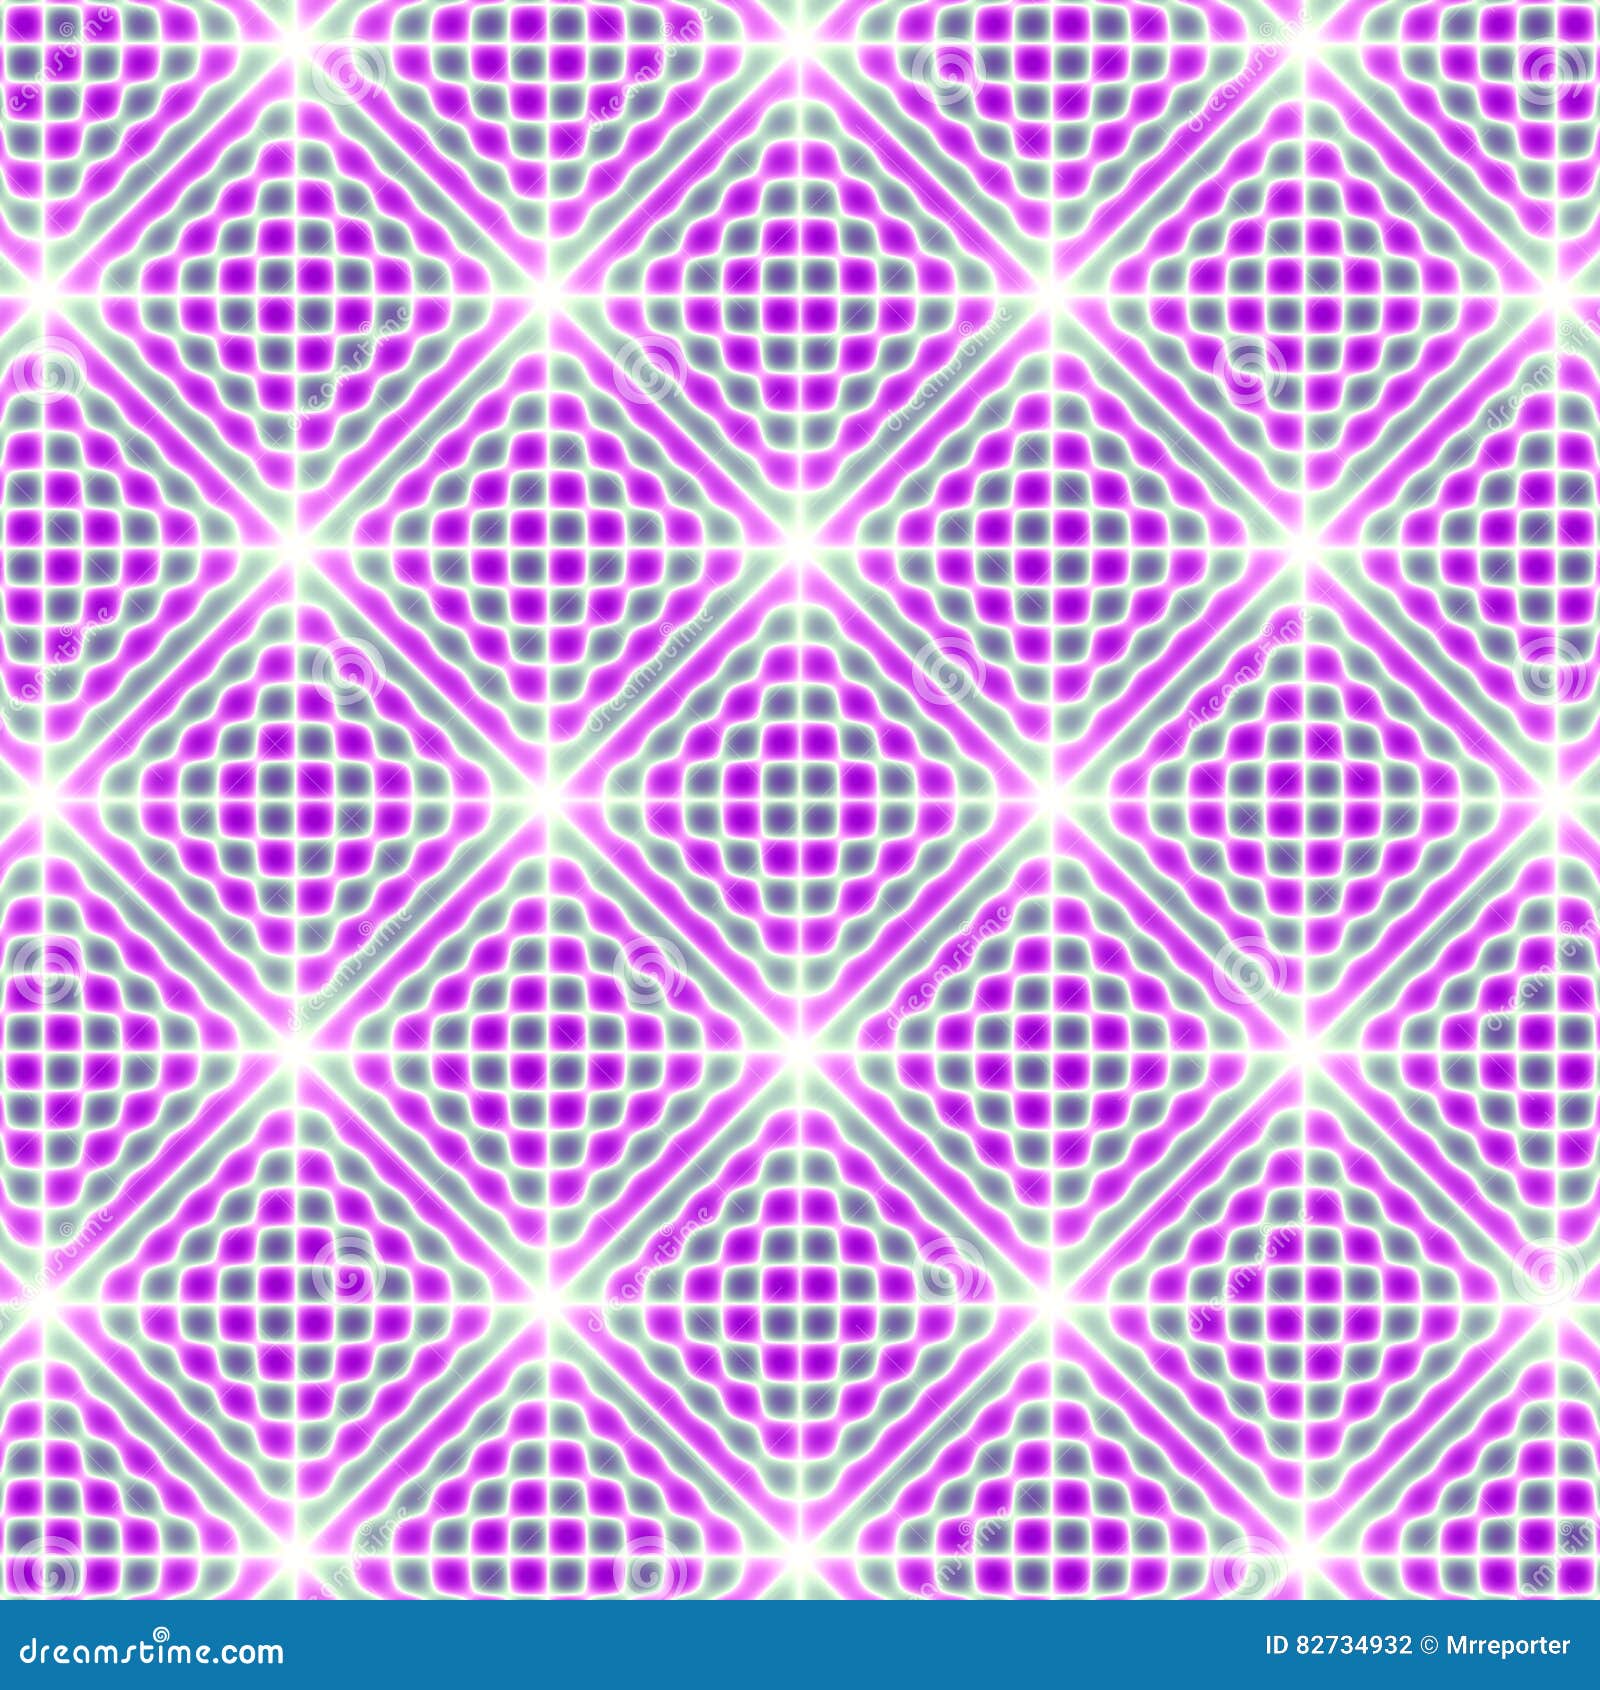 pattern pink with its blinks